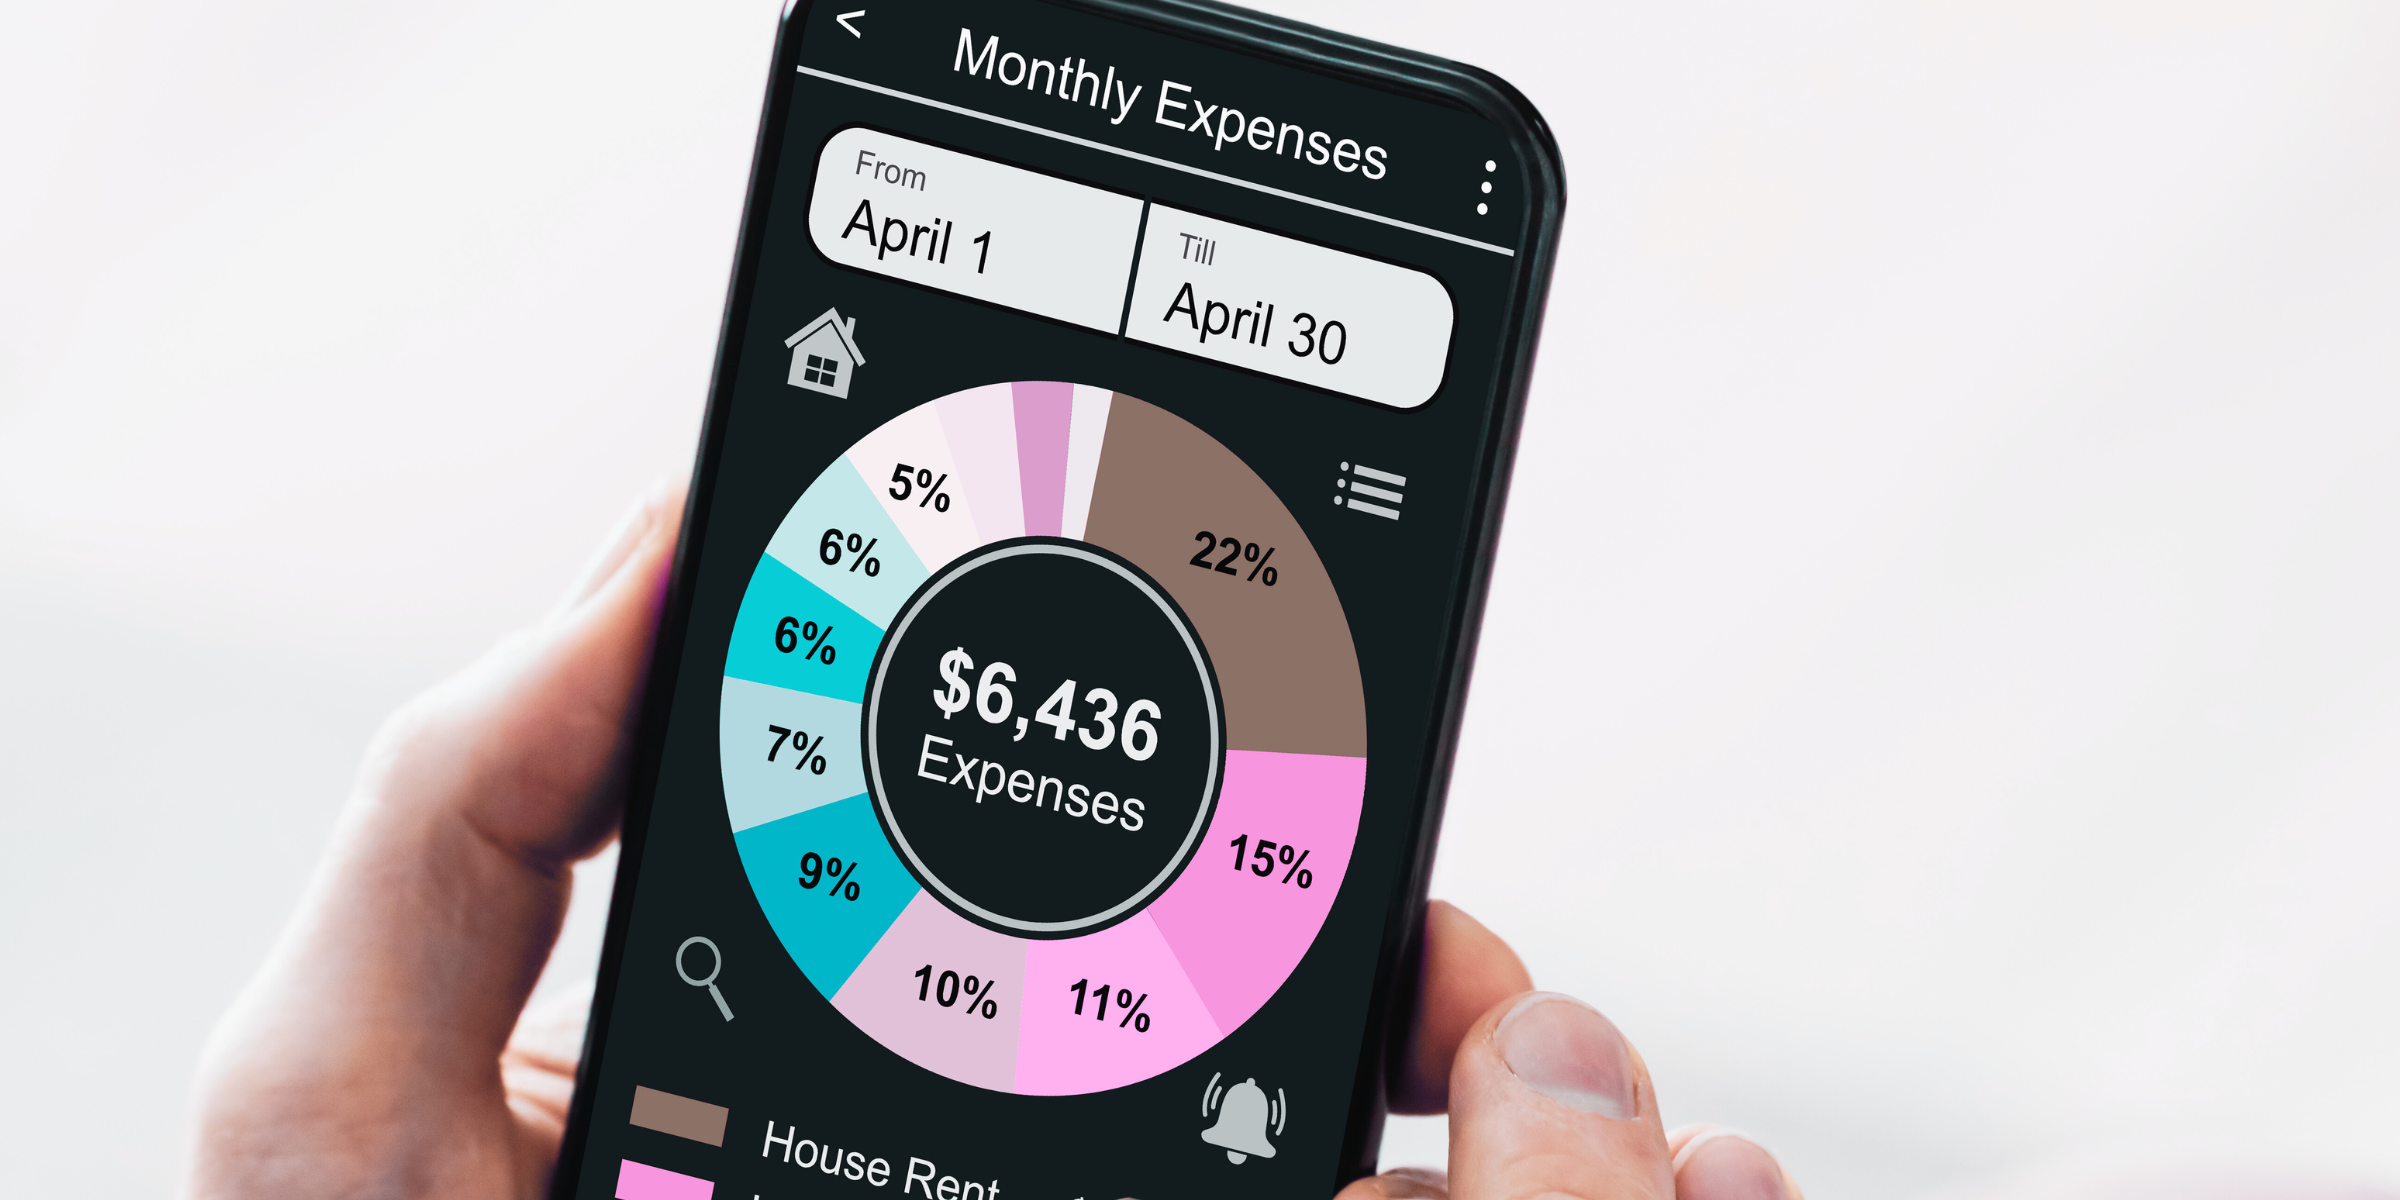 financial health tracking monthly expenses on iphone app